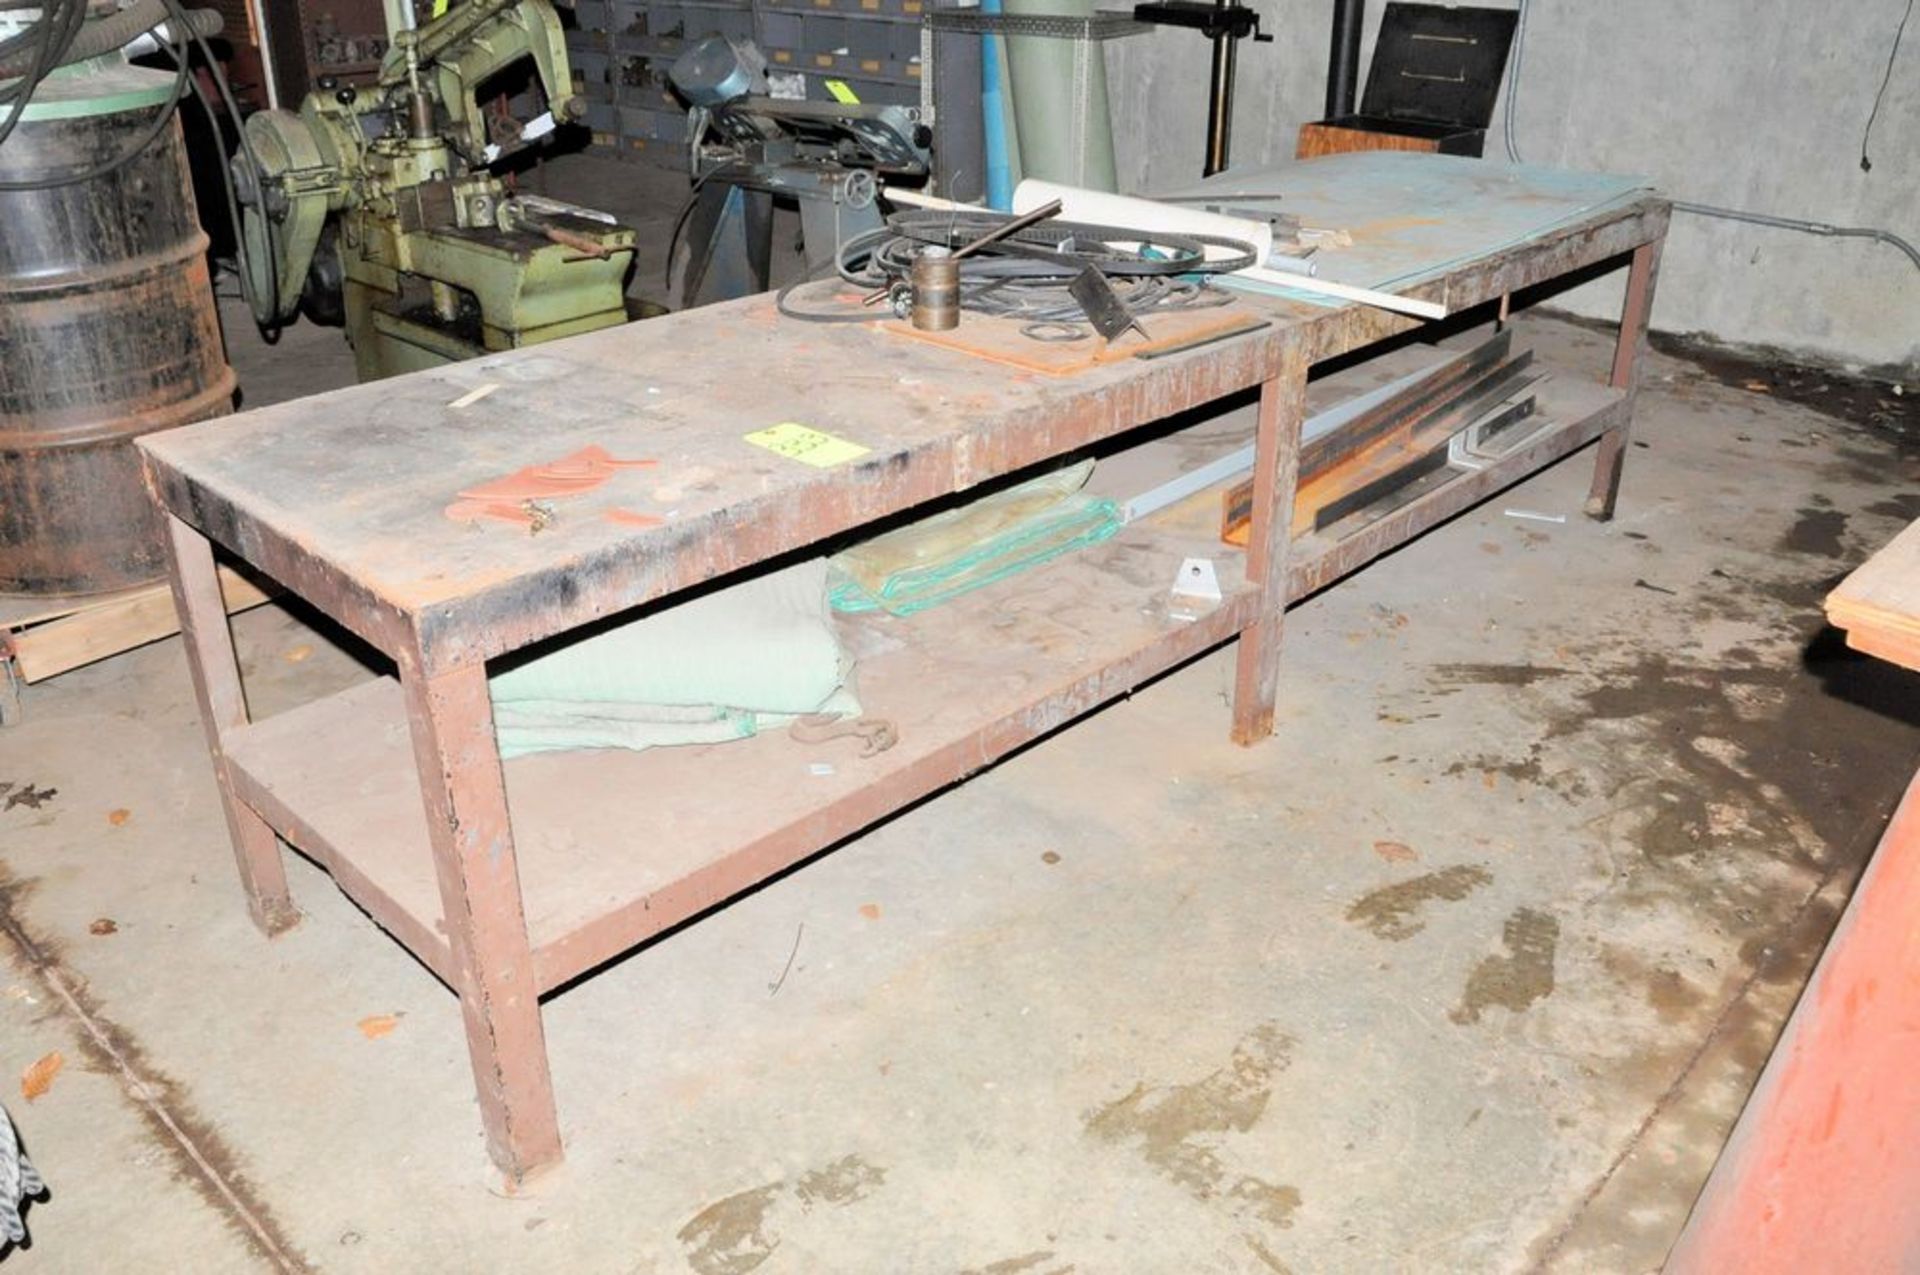 Lot-(1) Section Shelving and Bench with Maintenance Contents, and (1) Long Steel Work Table, (